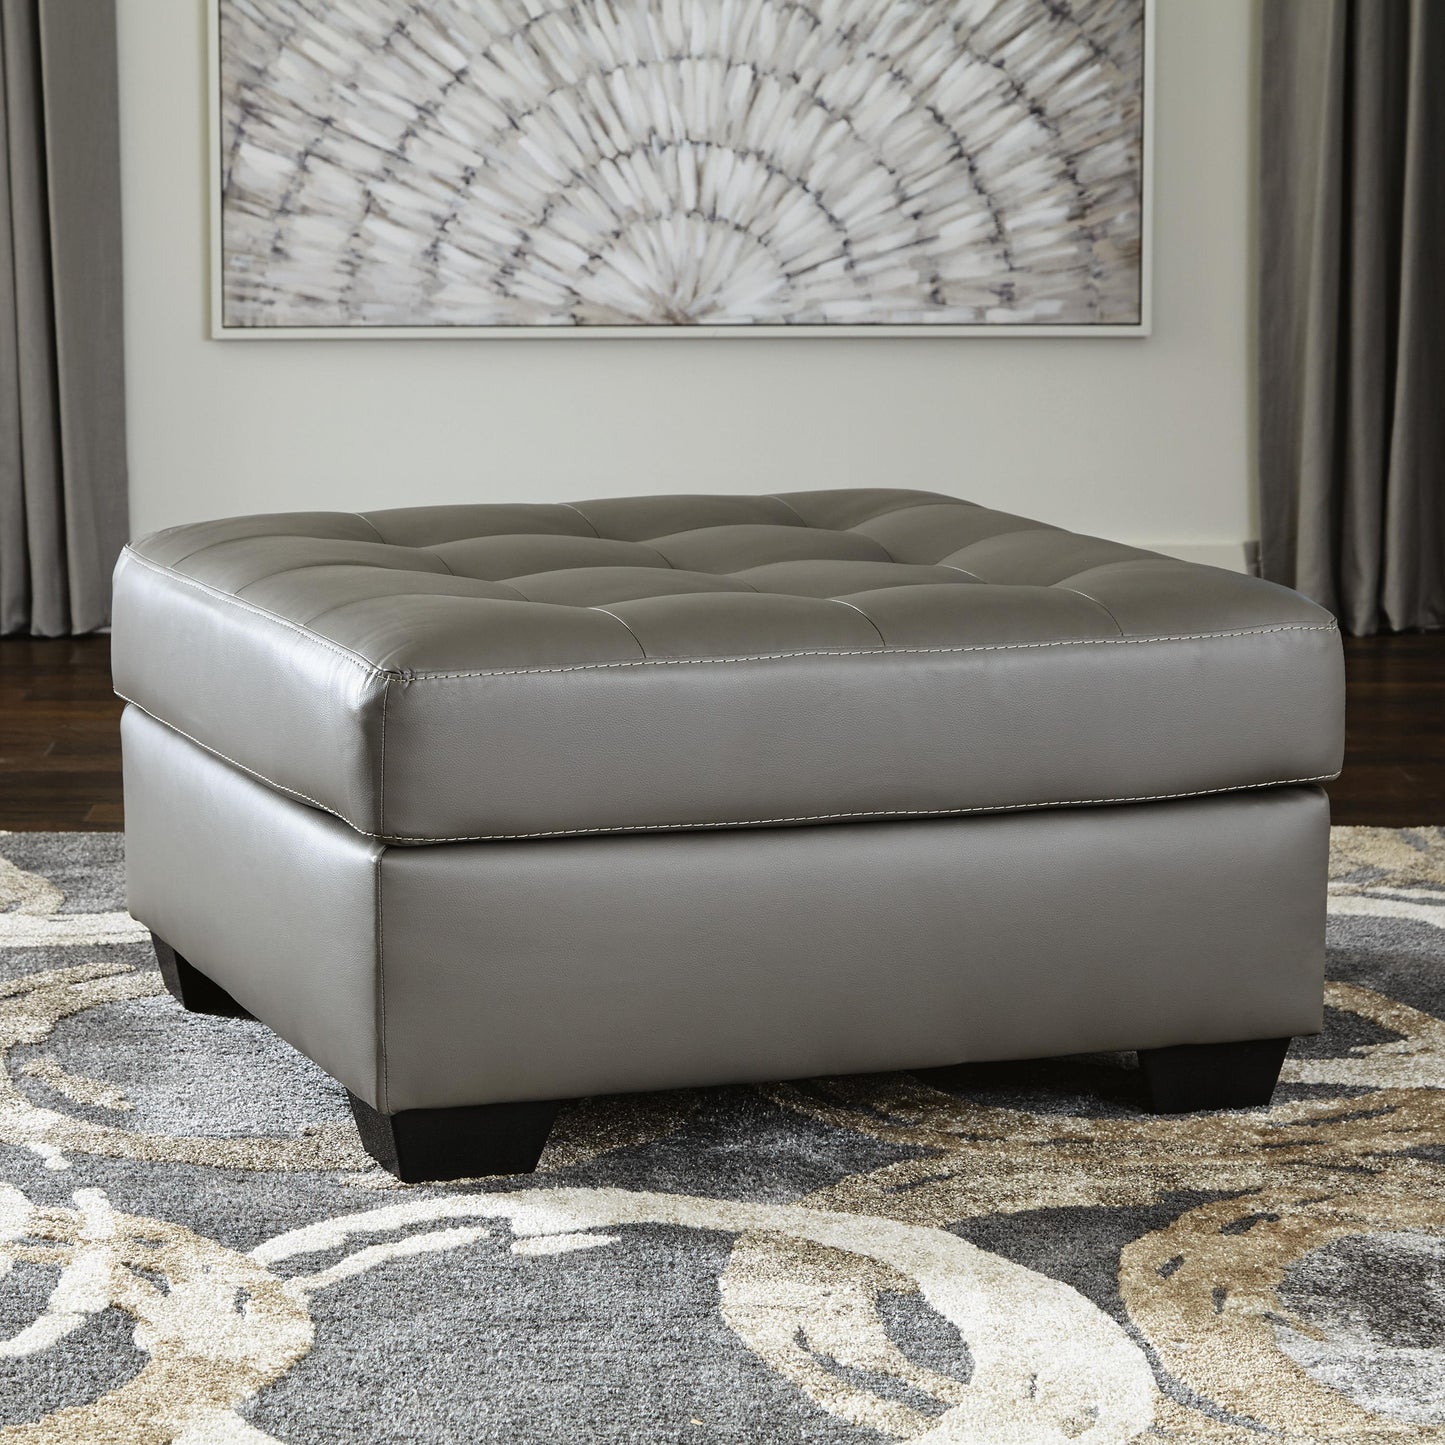 Signature Design by Ashley Donlen Leather Look Ottoman 5970208 IMAGE 4